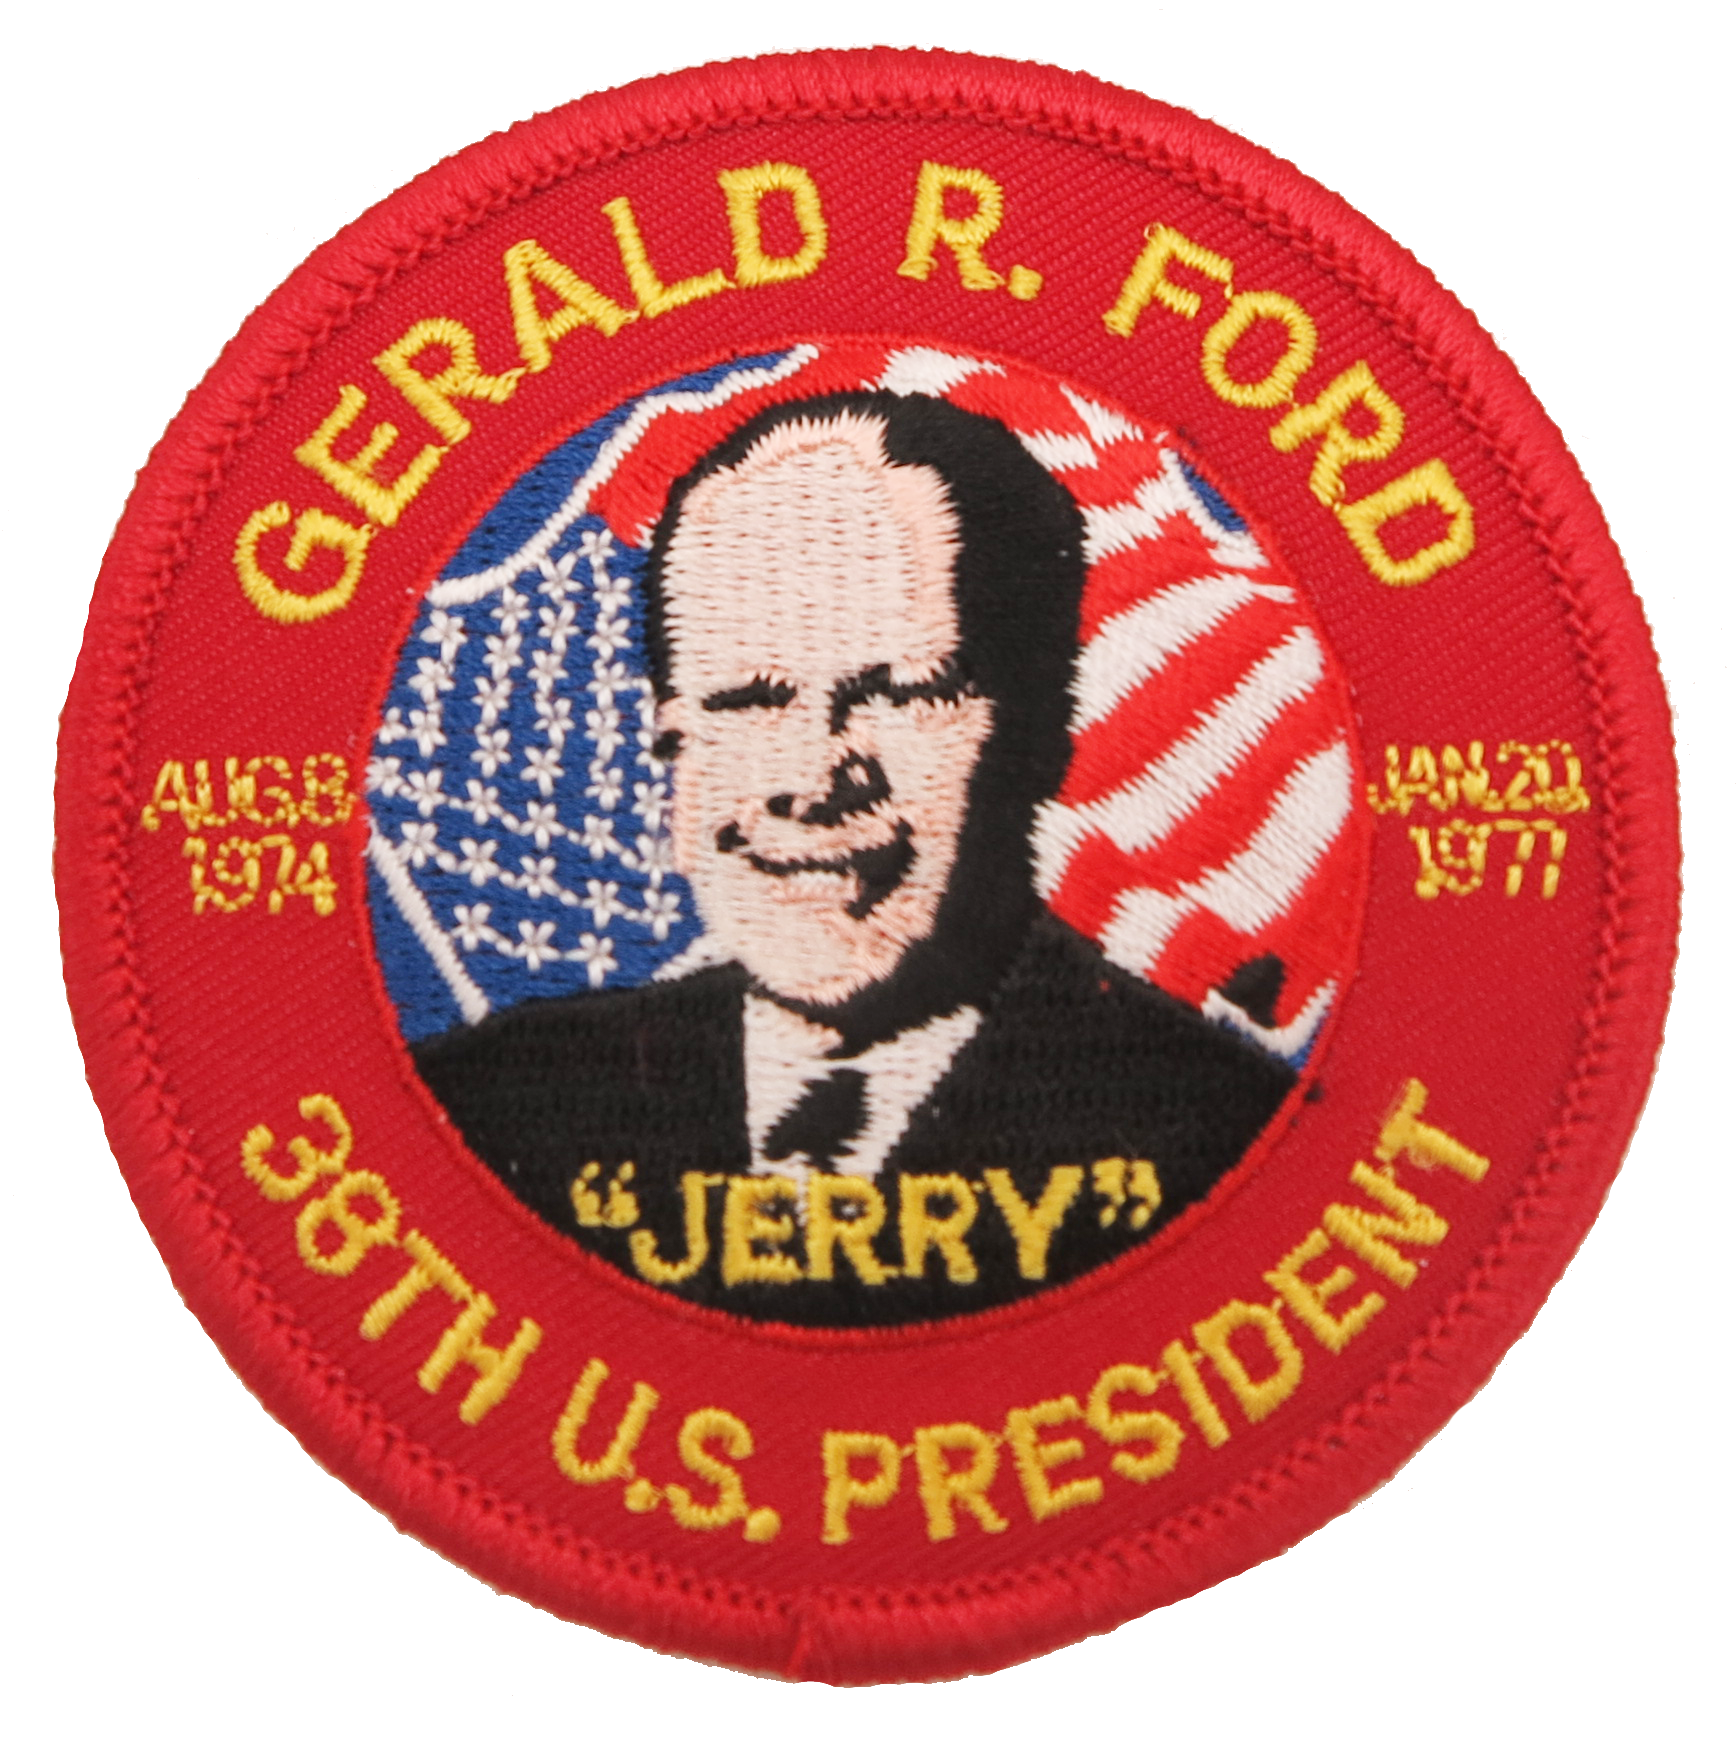 Gerald R. Ford "Jerry" Iron-on Patch